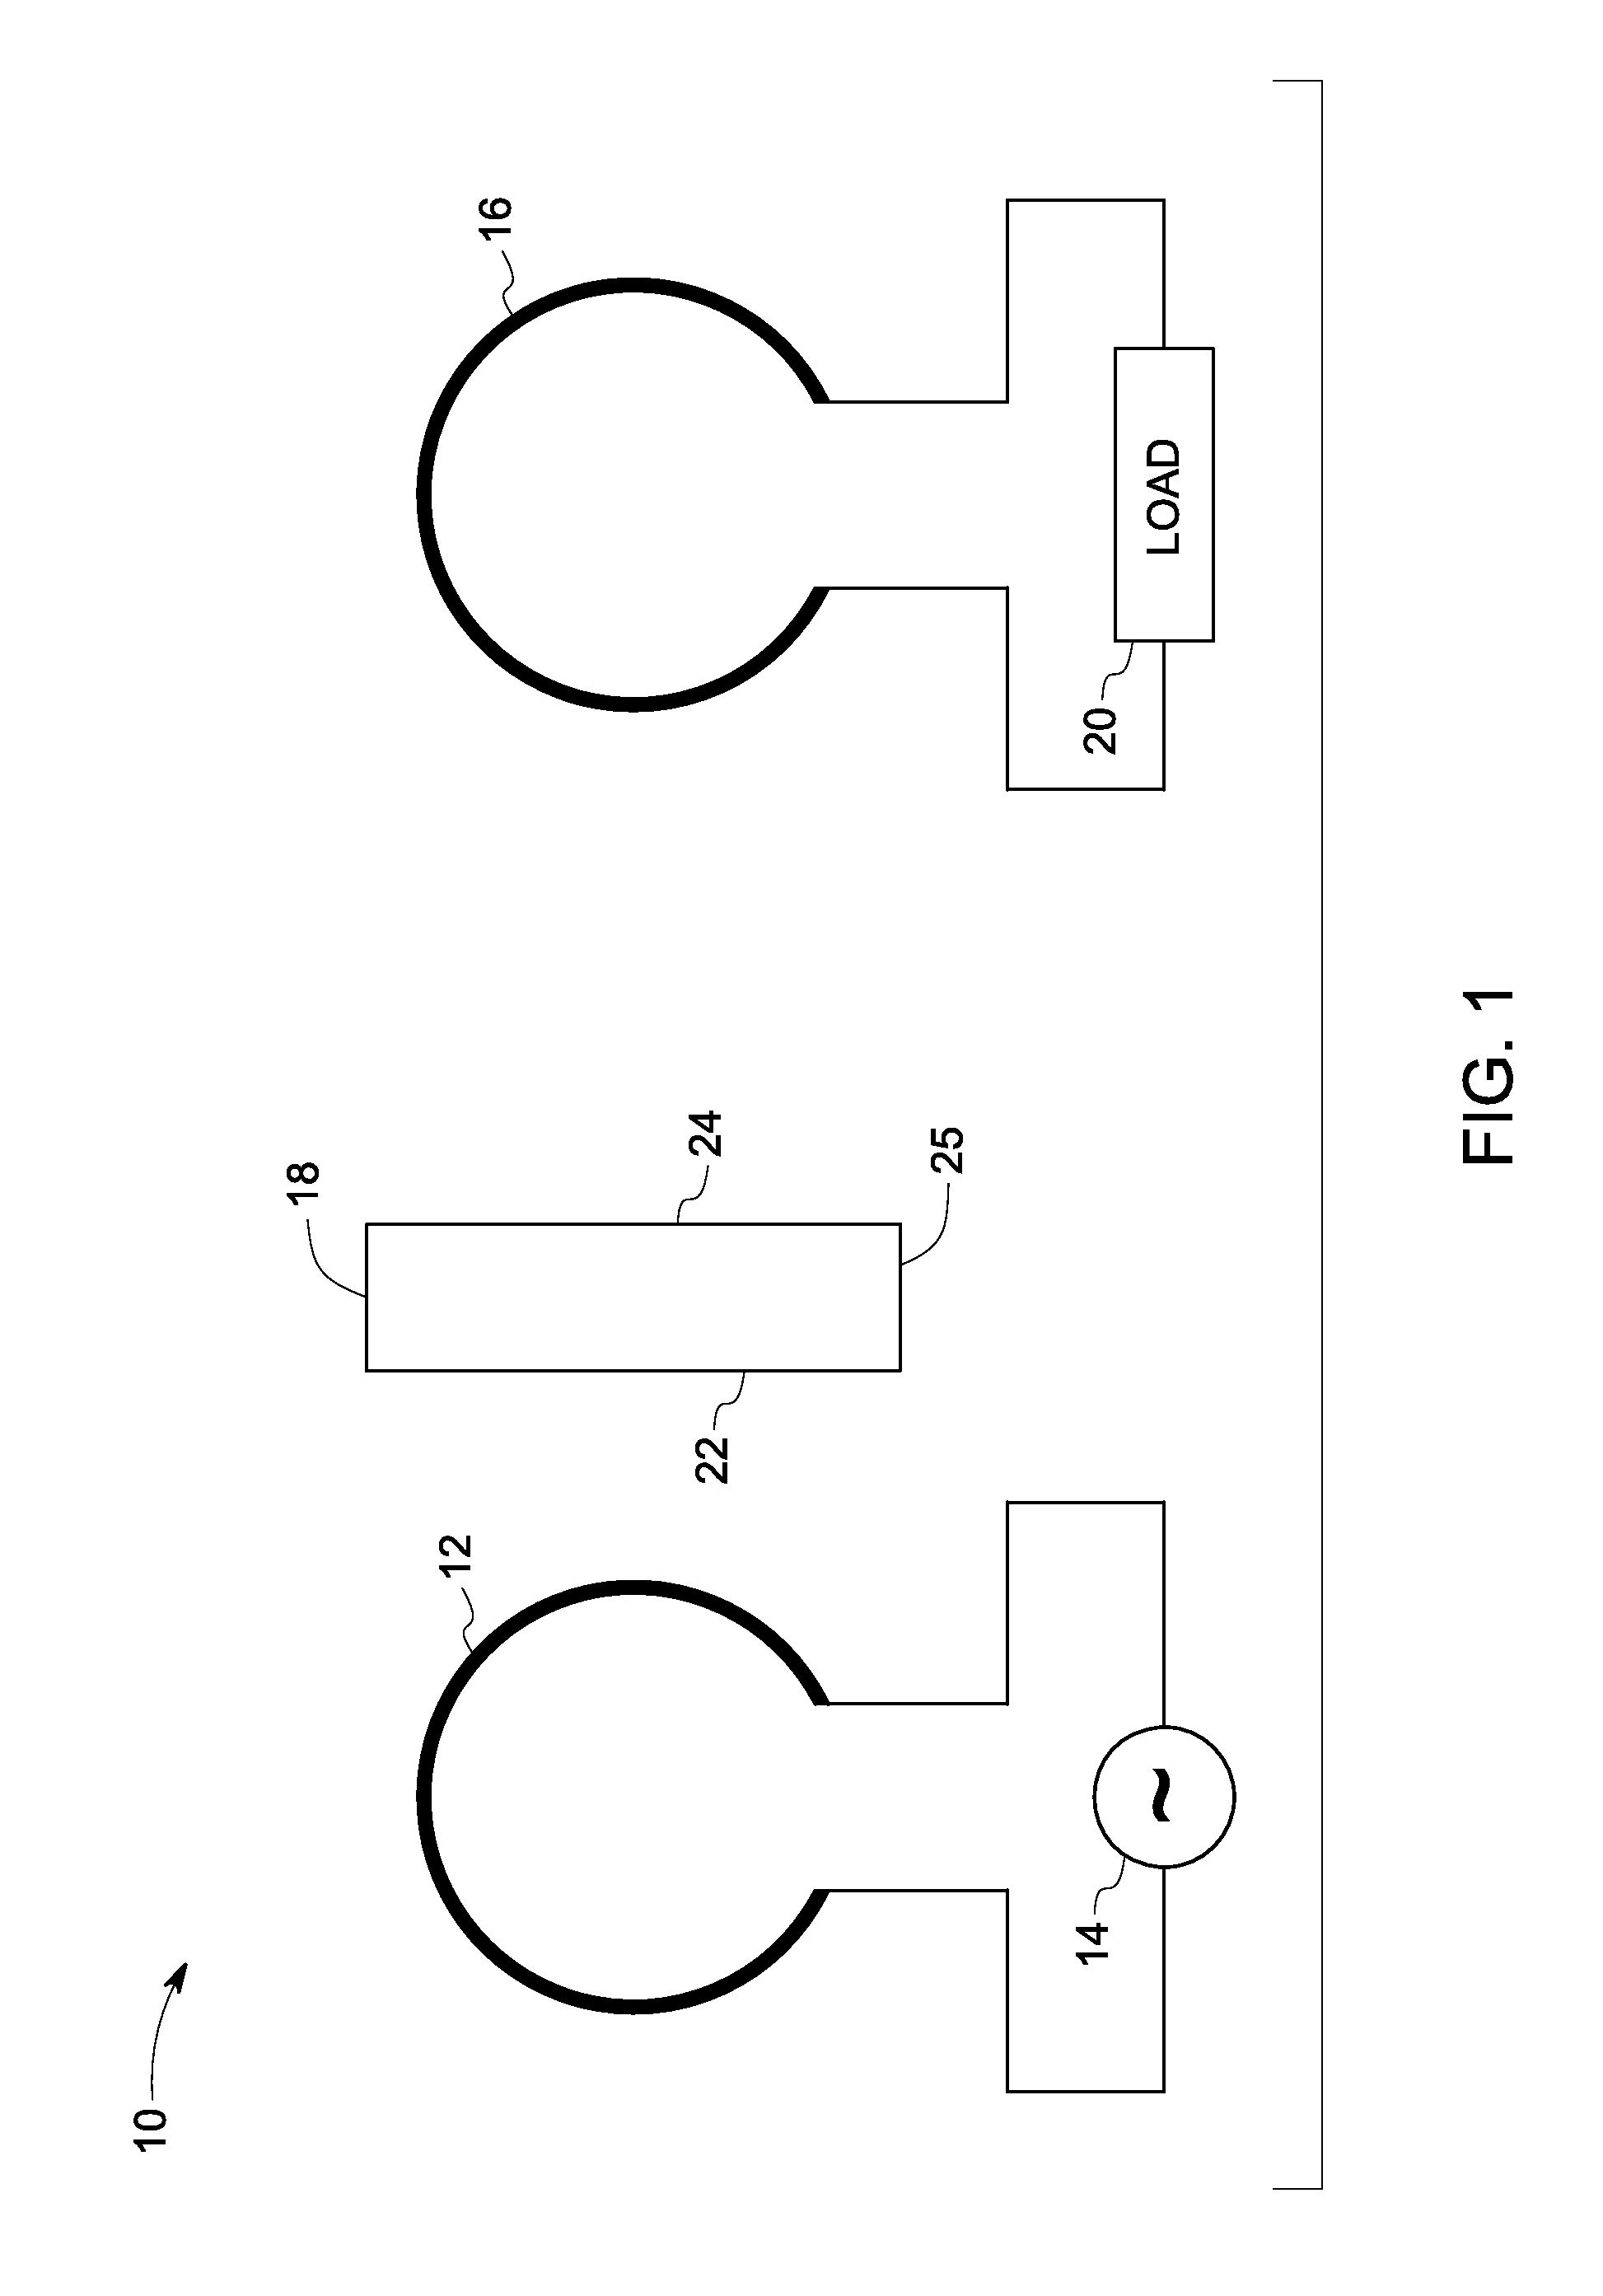 Dielectric materials for power transfer system